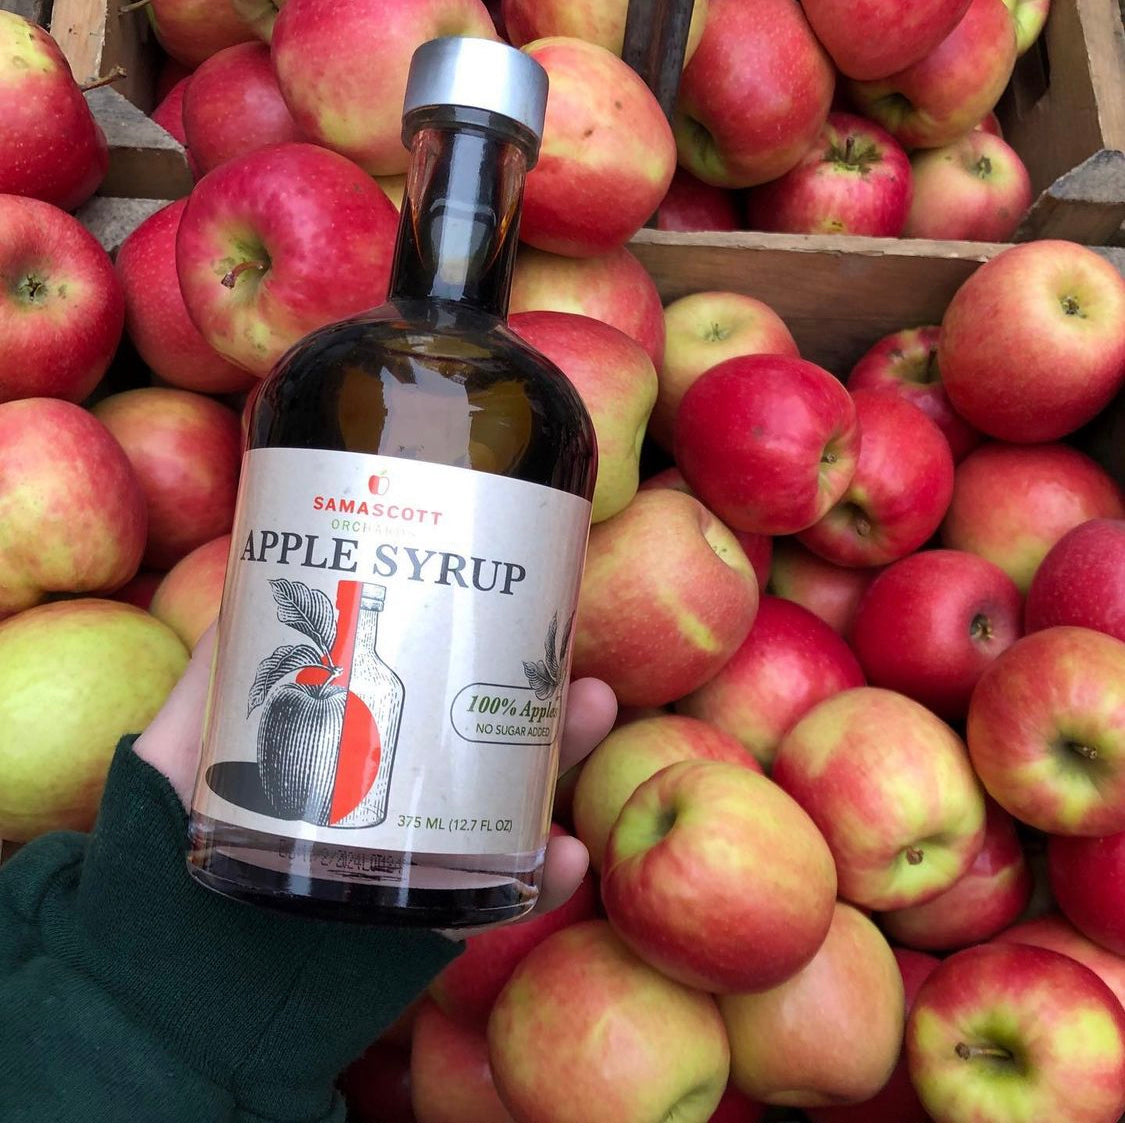 Box of 4 Apples + Apple Syrup